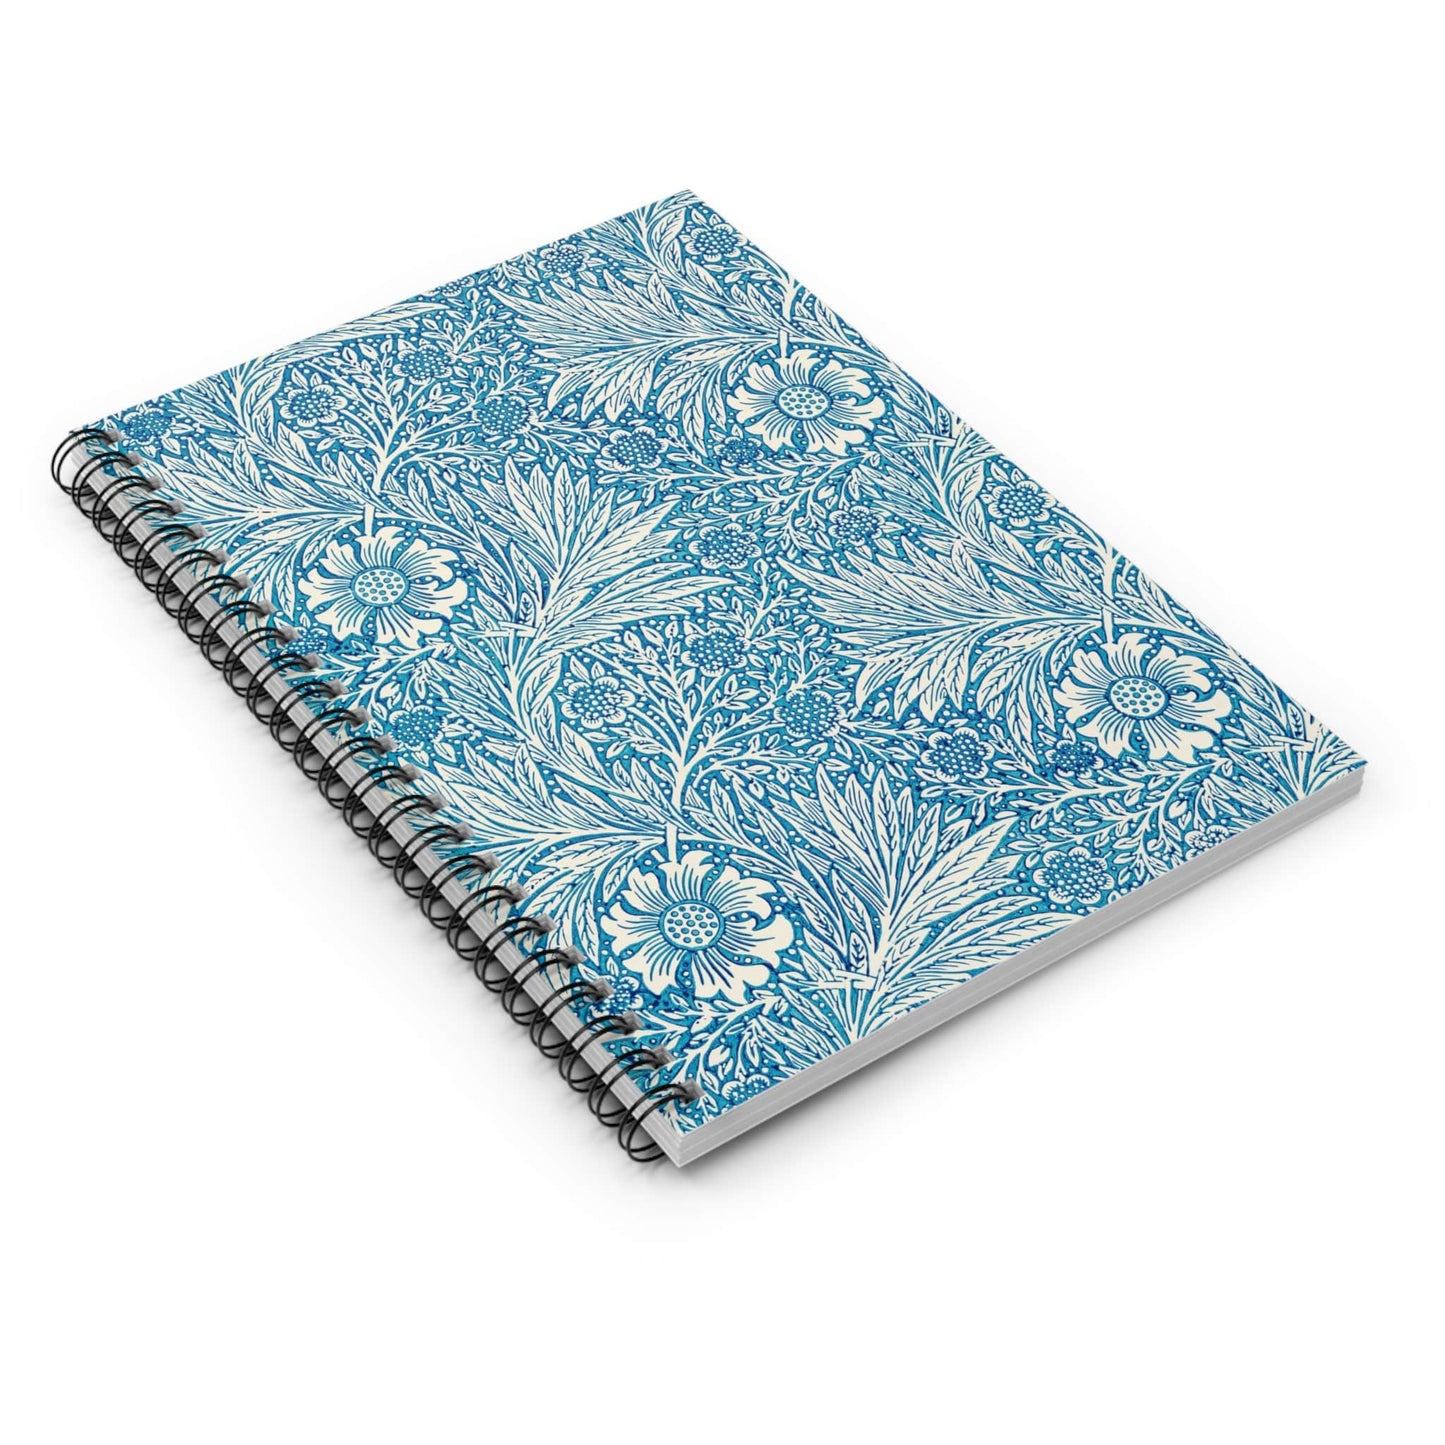 Floral Pattern Spiral Notebook Laying Flat on White Surface